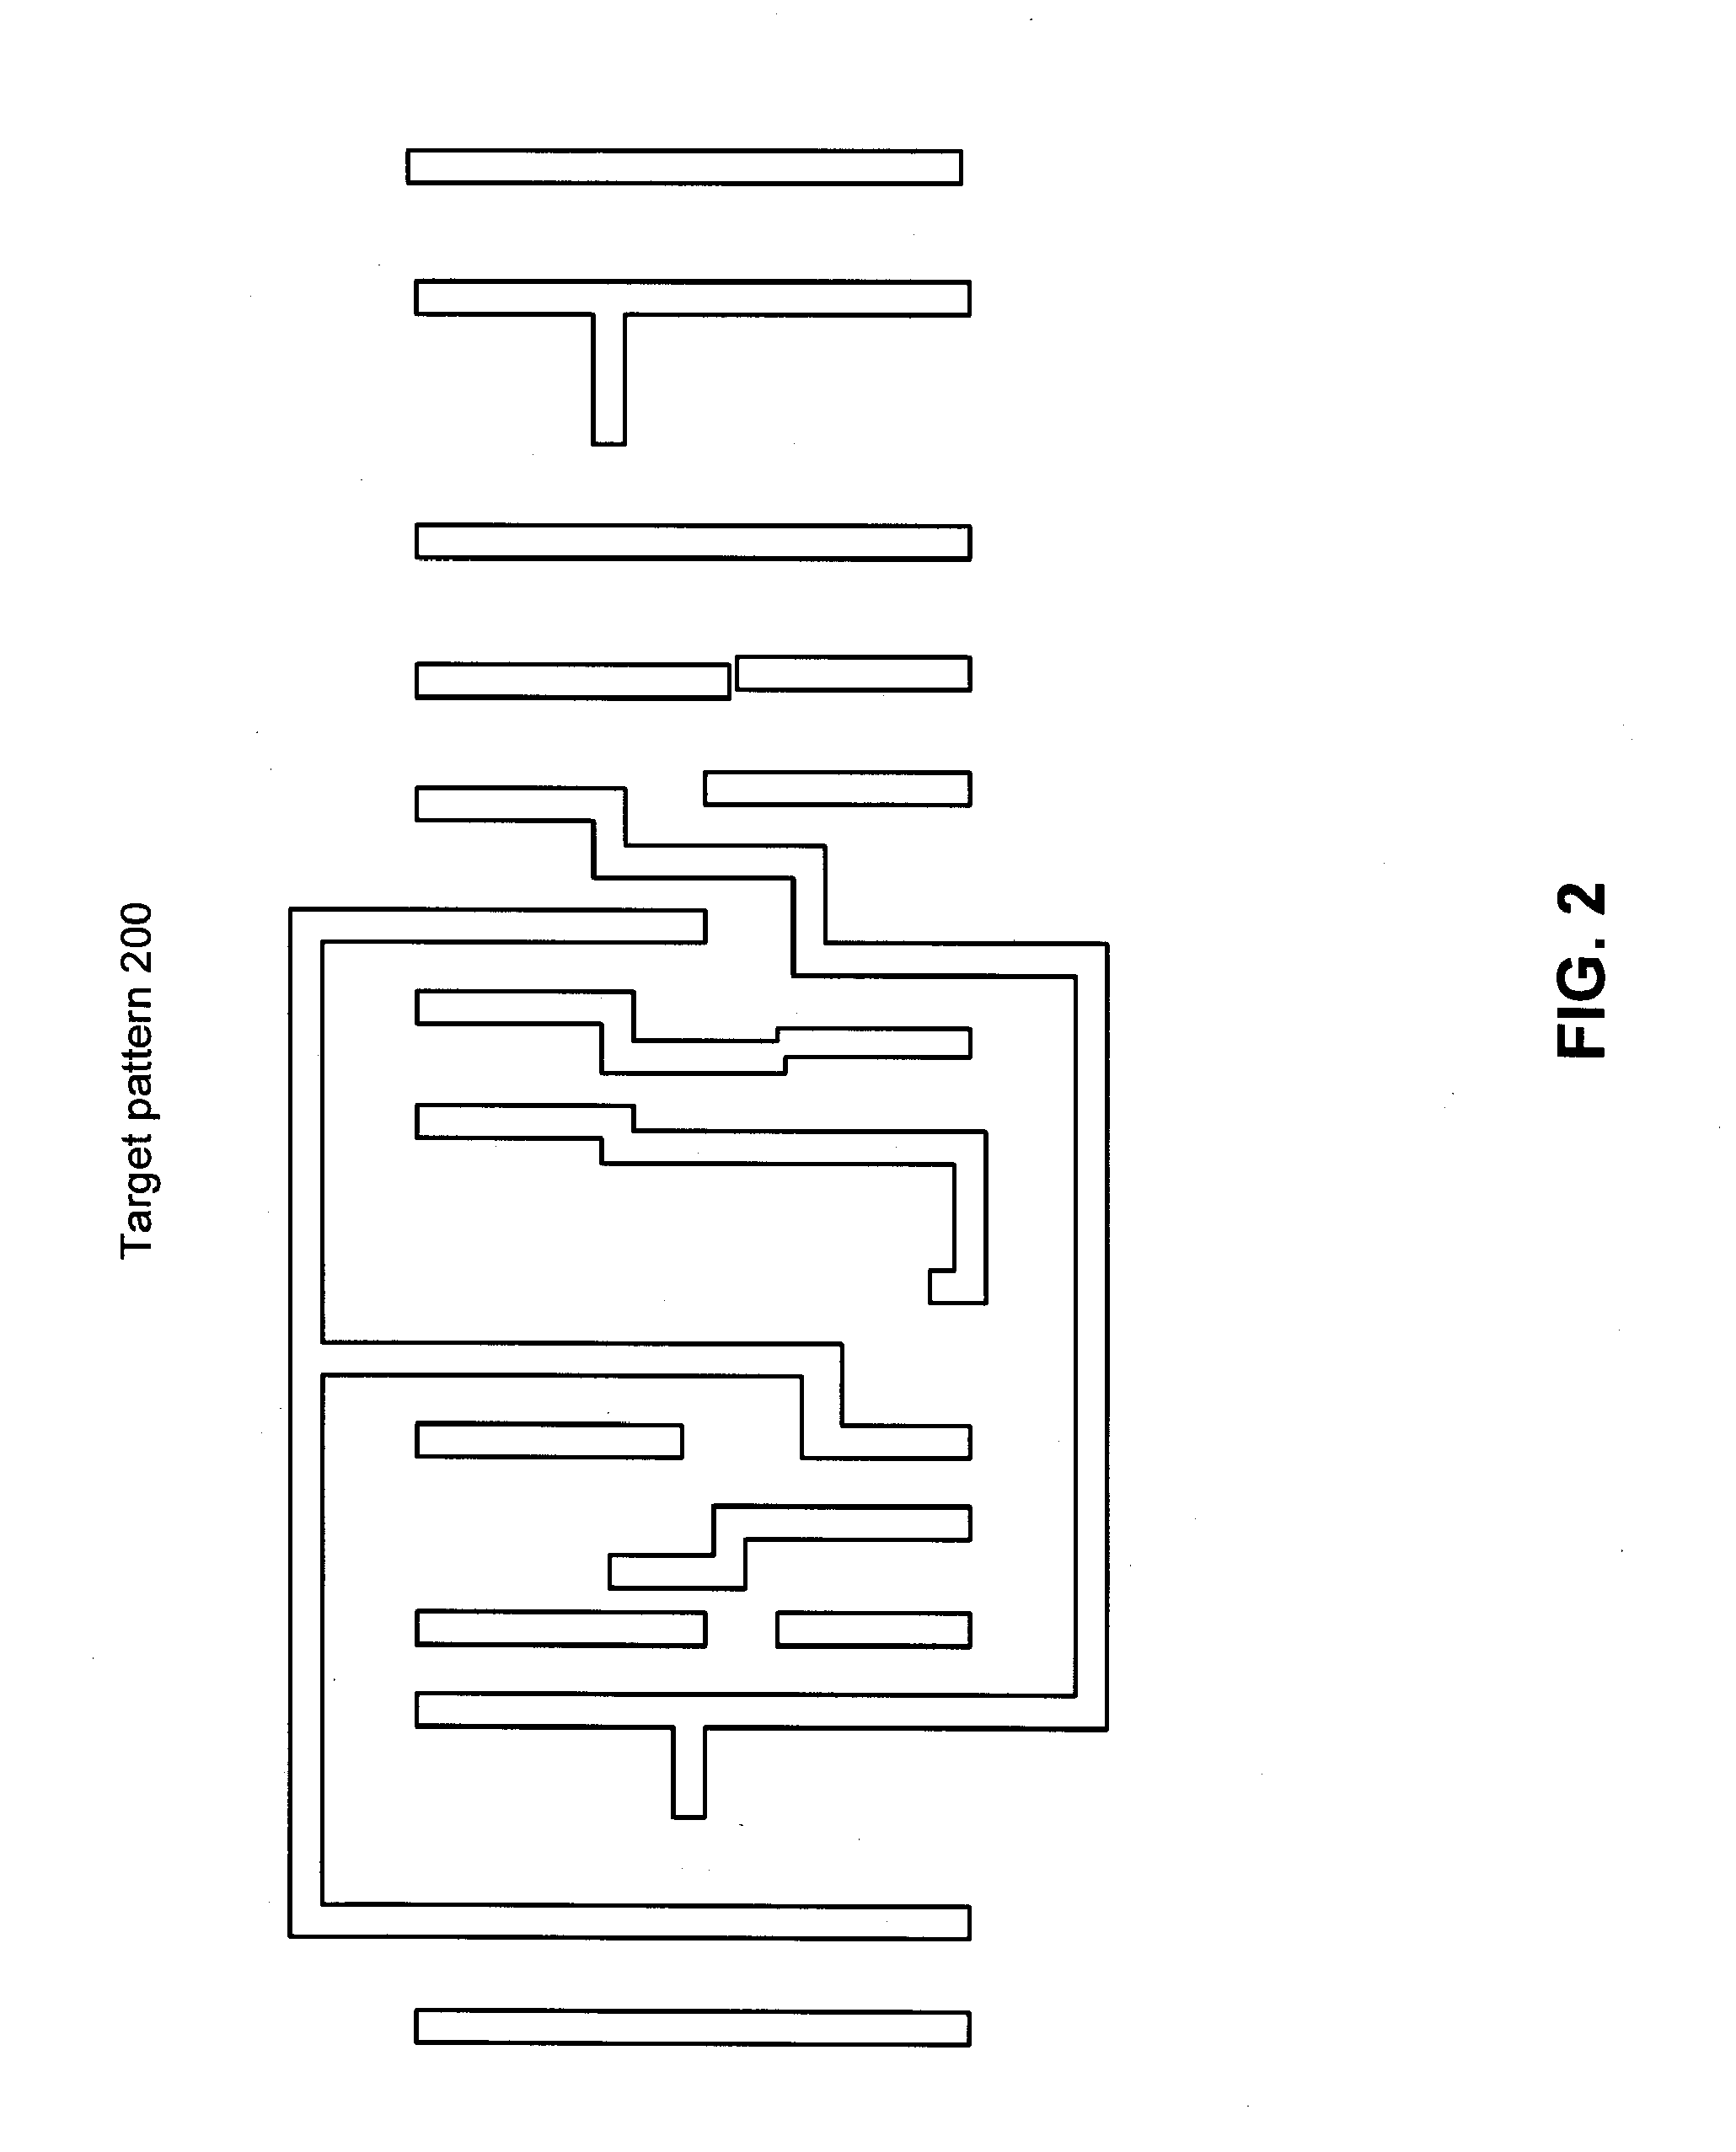 Systems, Masks, and Methods for Photolithography